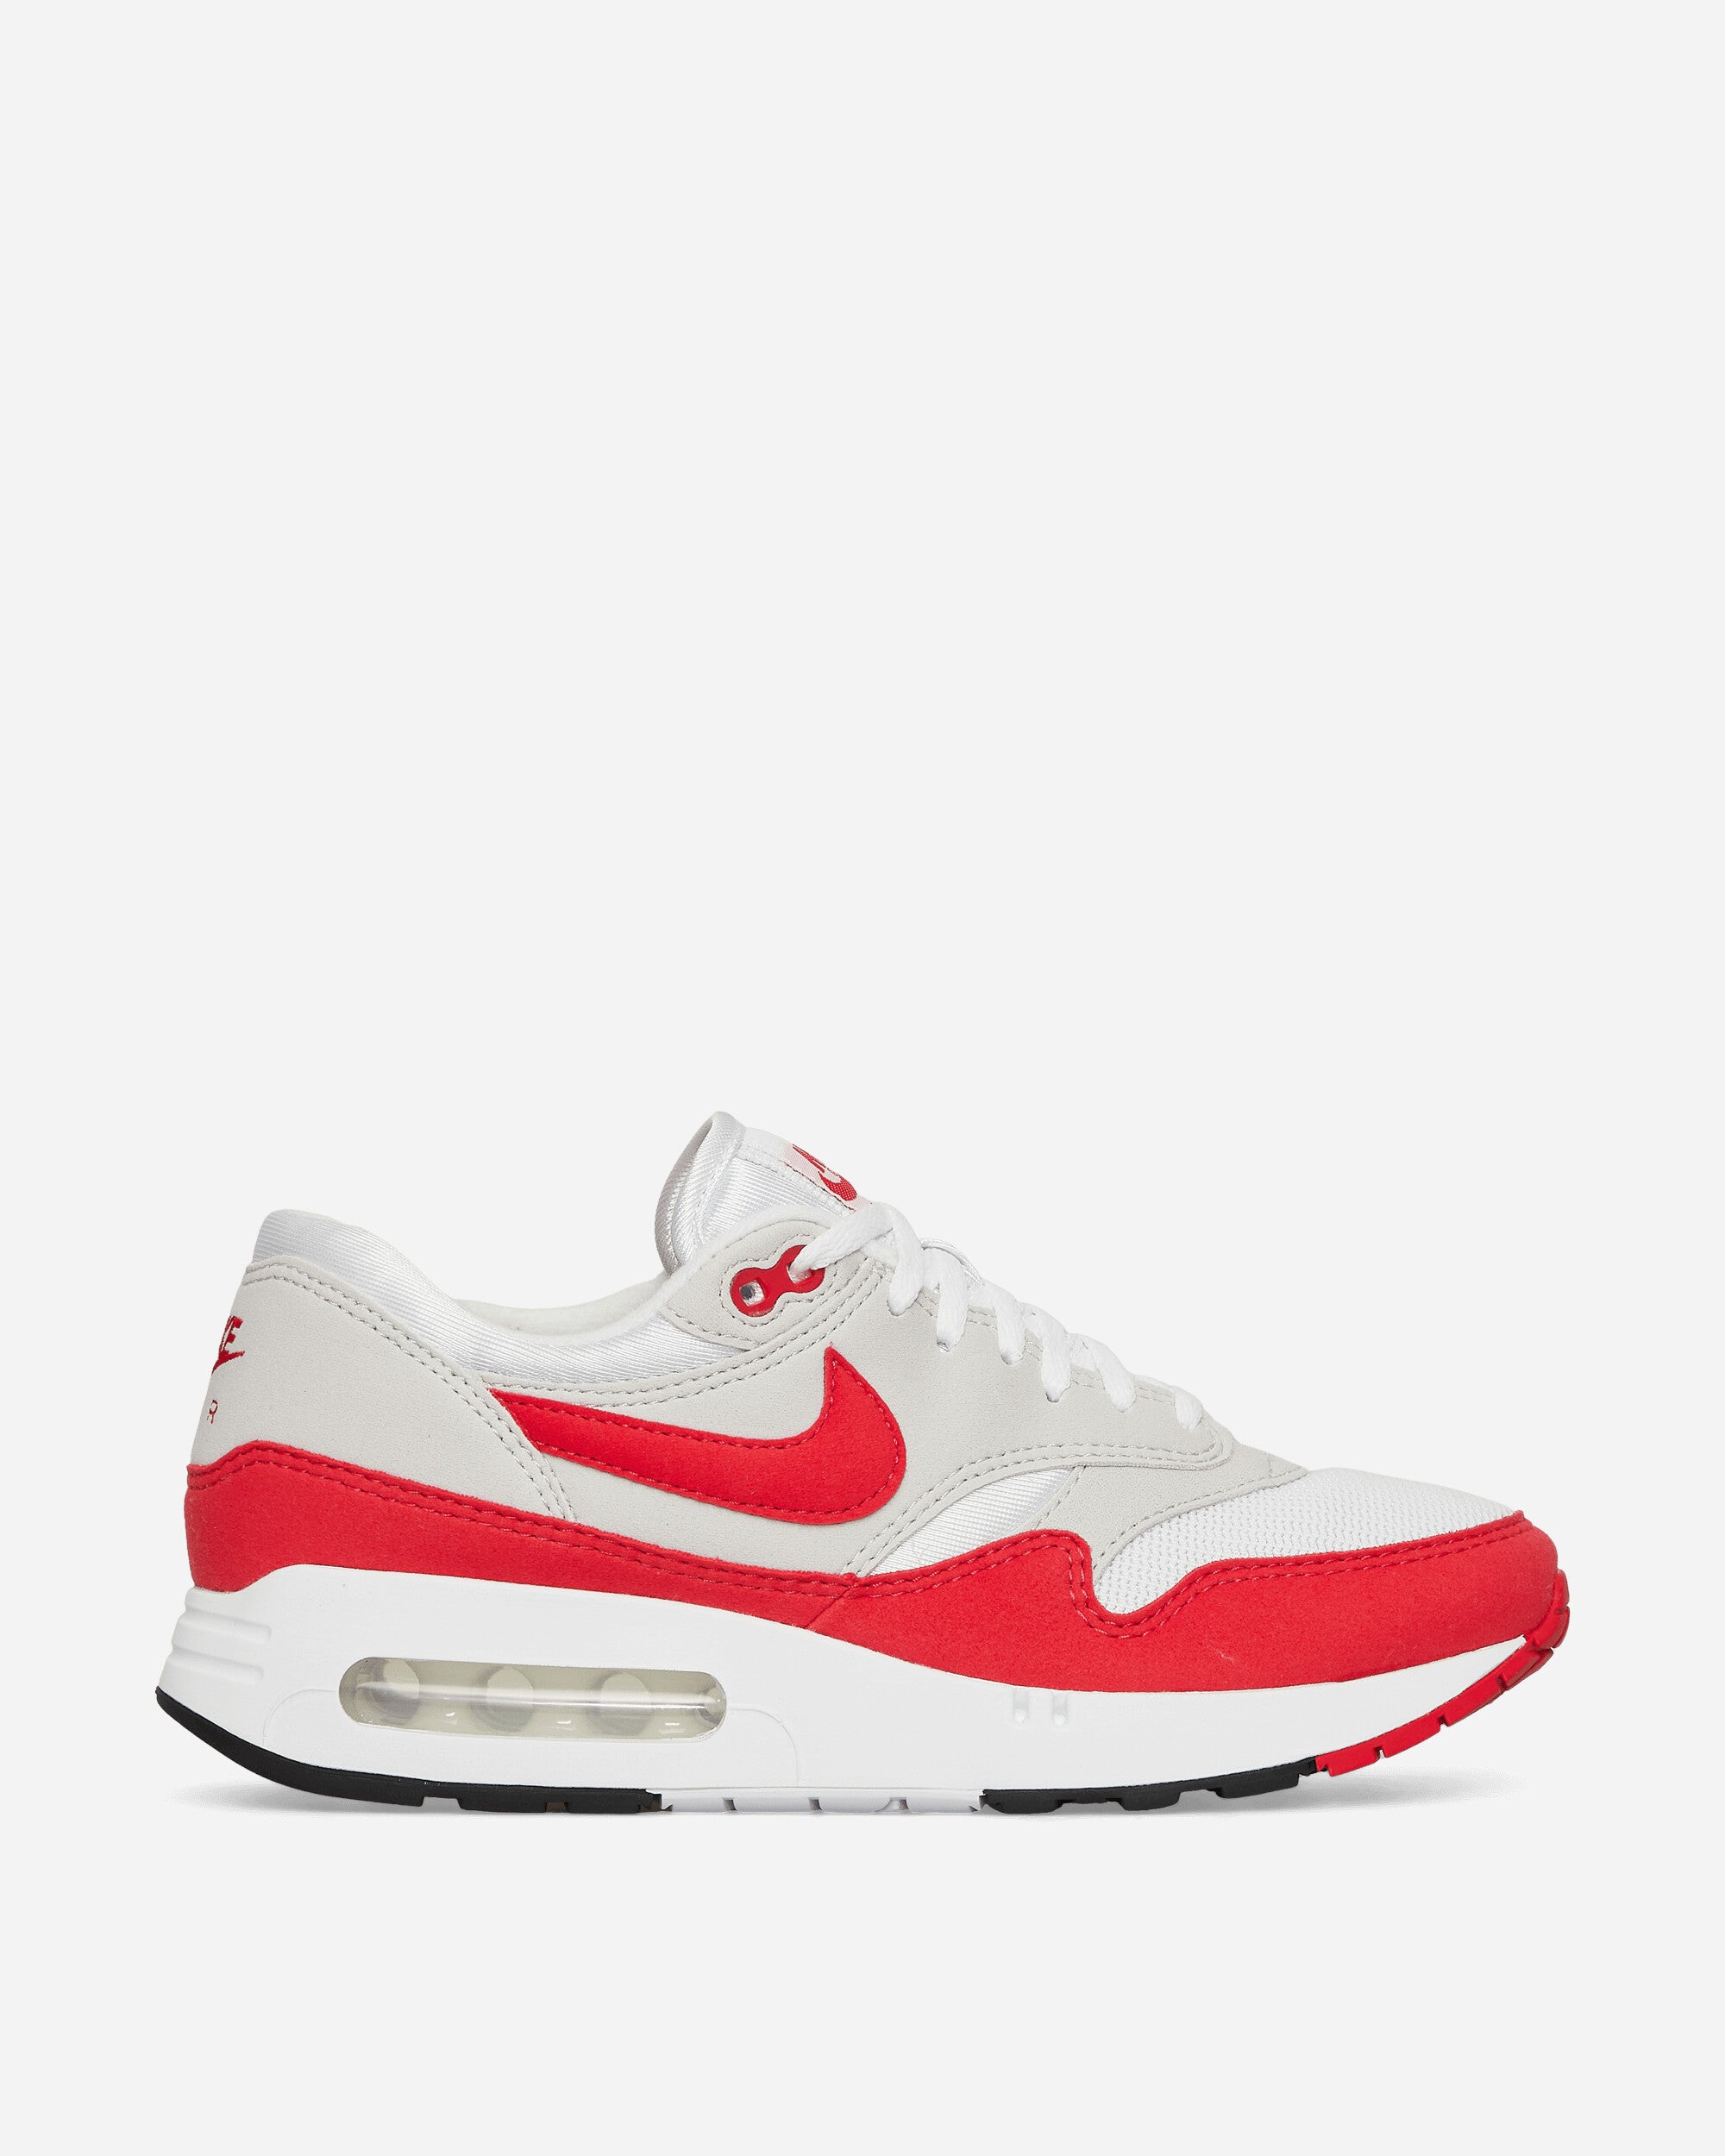 Nike Wmns Nike Air Max 1 86 Og White/University Red Sneakers Low DO9844-100